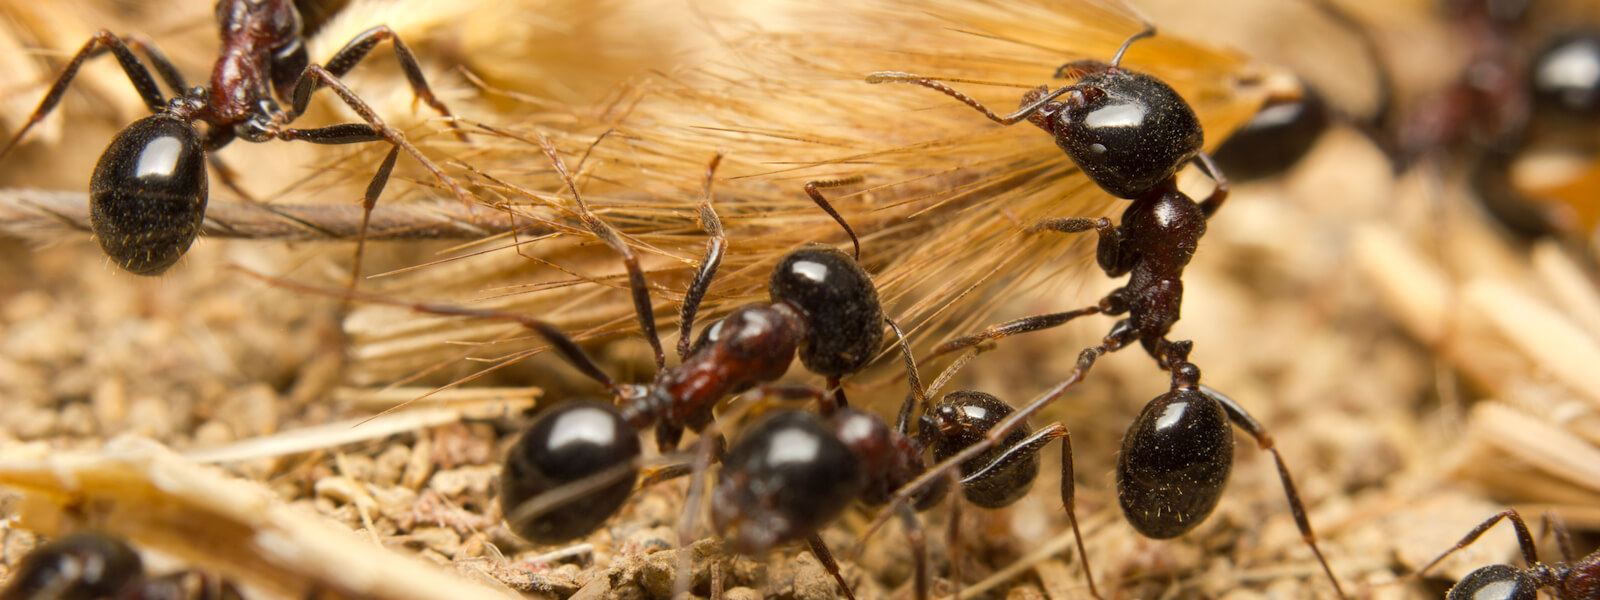 Ants dragging vegetation to the colony